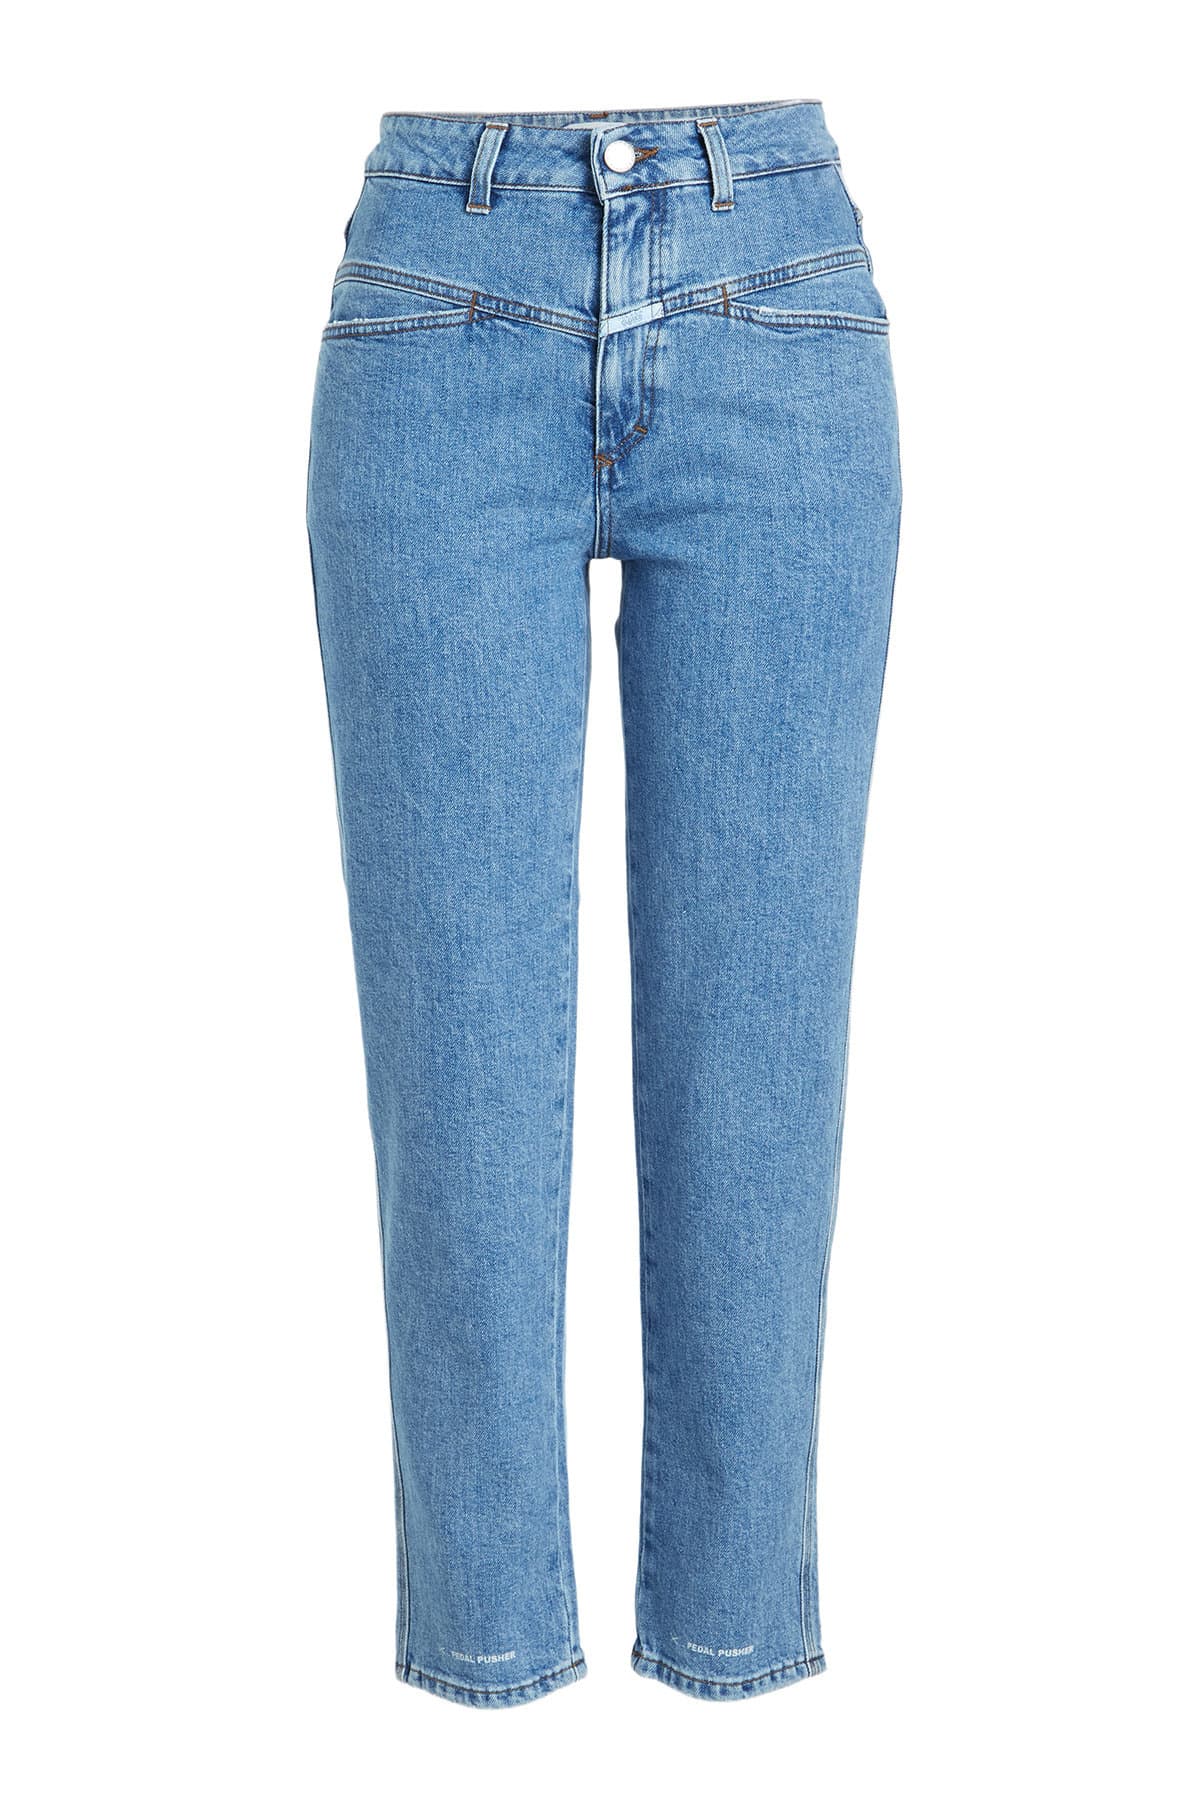 Pedal Pusher Cropped Jeans by Closed